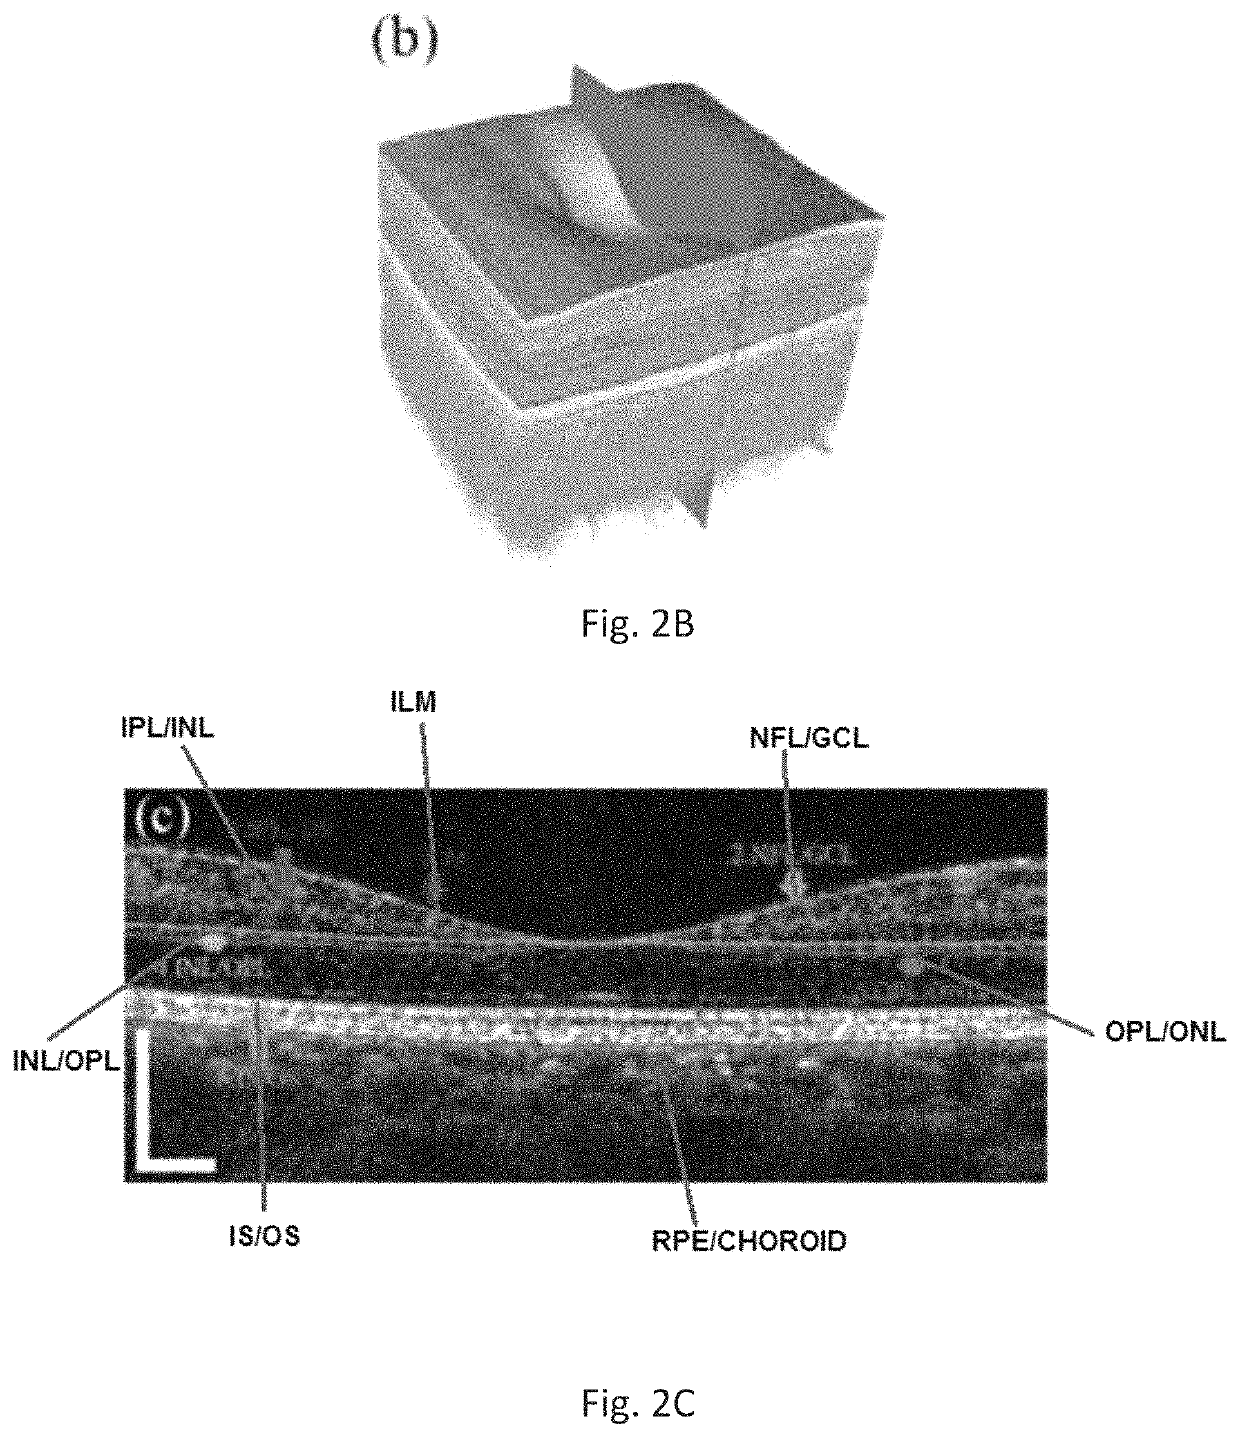 Automatic three-dimensional segmentation method for OCT and doppler OCT angiography